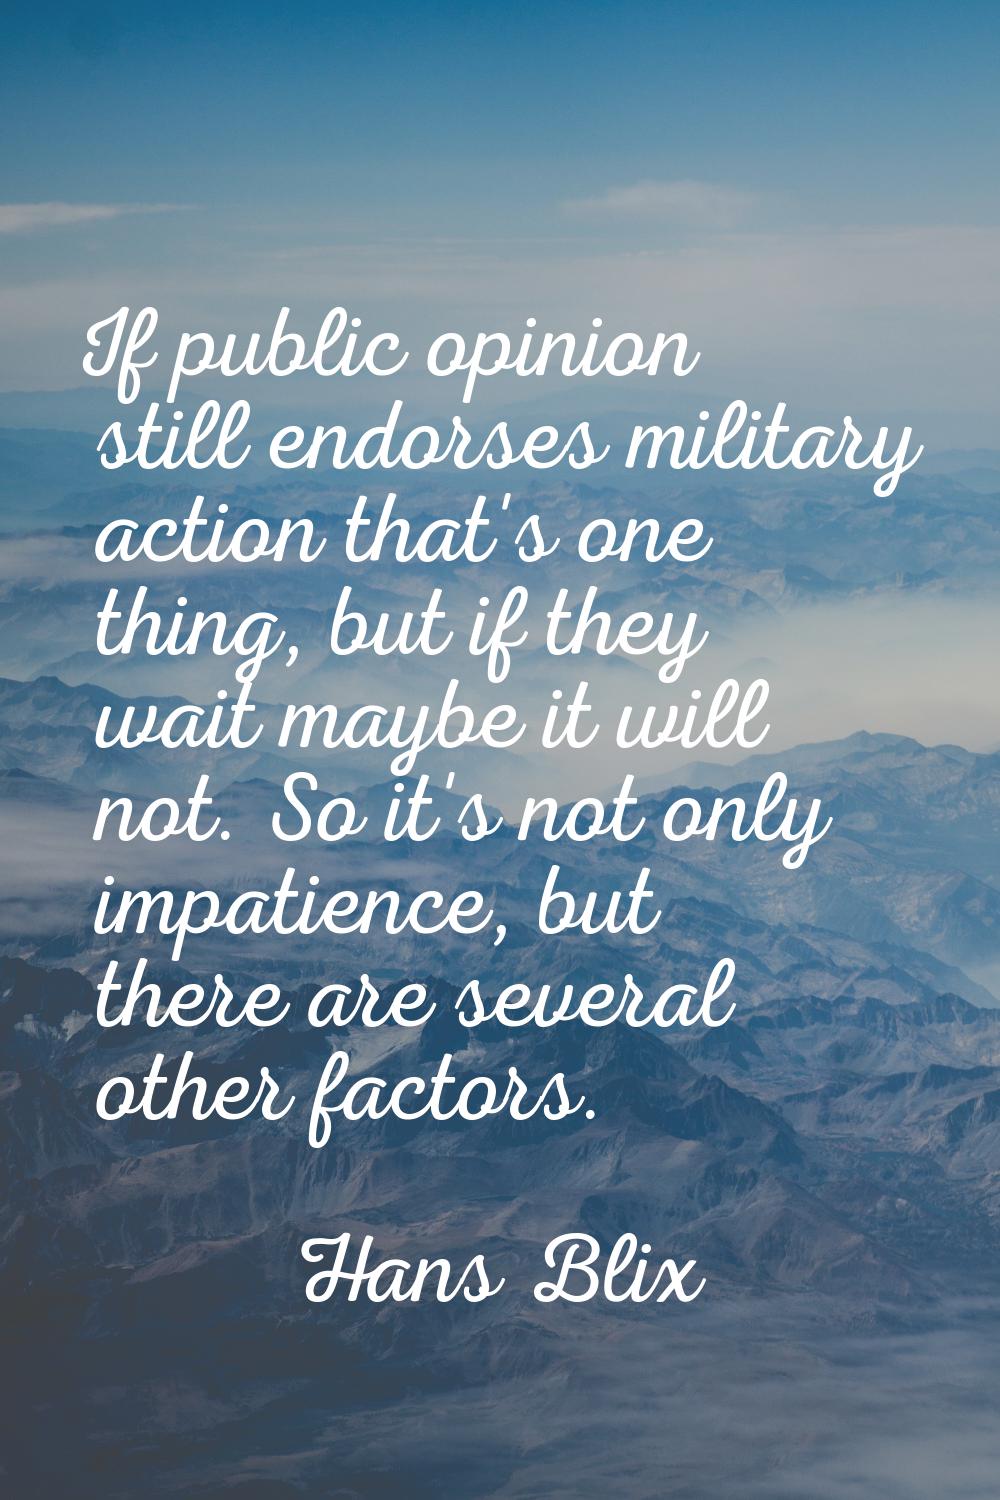 If public opinion still endorses military action that's one thing, but if they wait maybe it will n